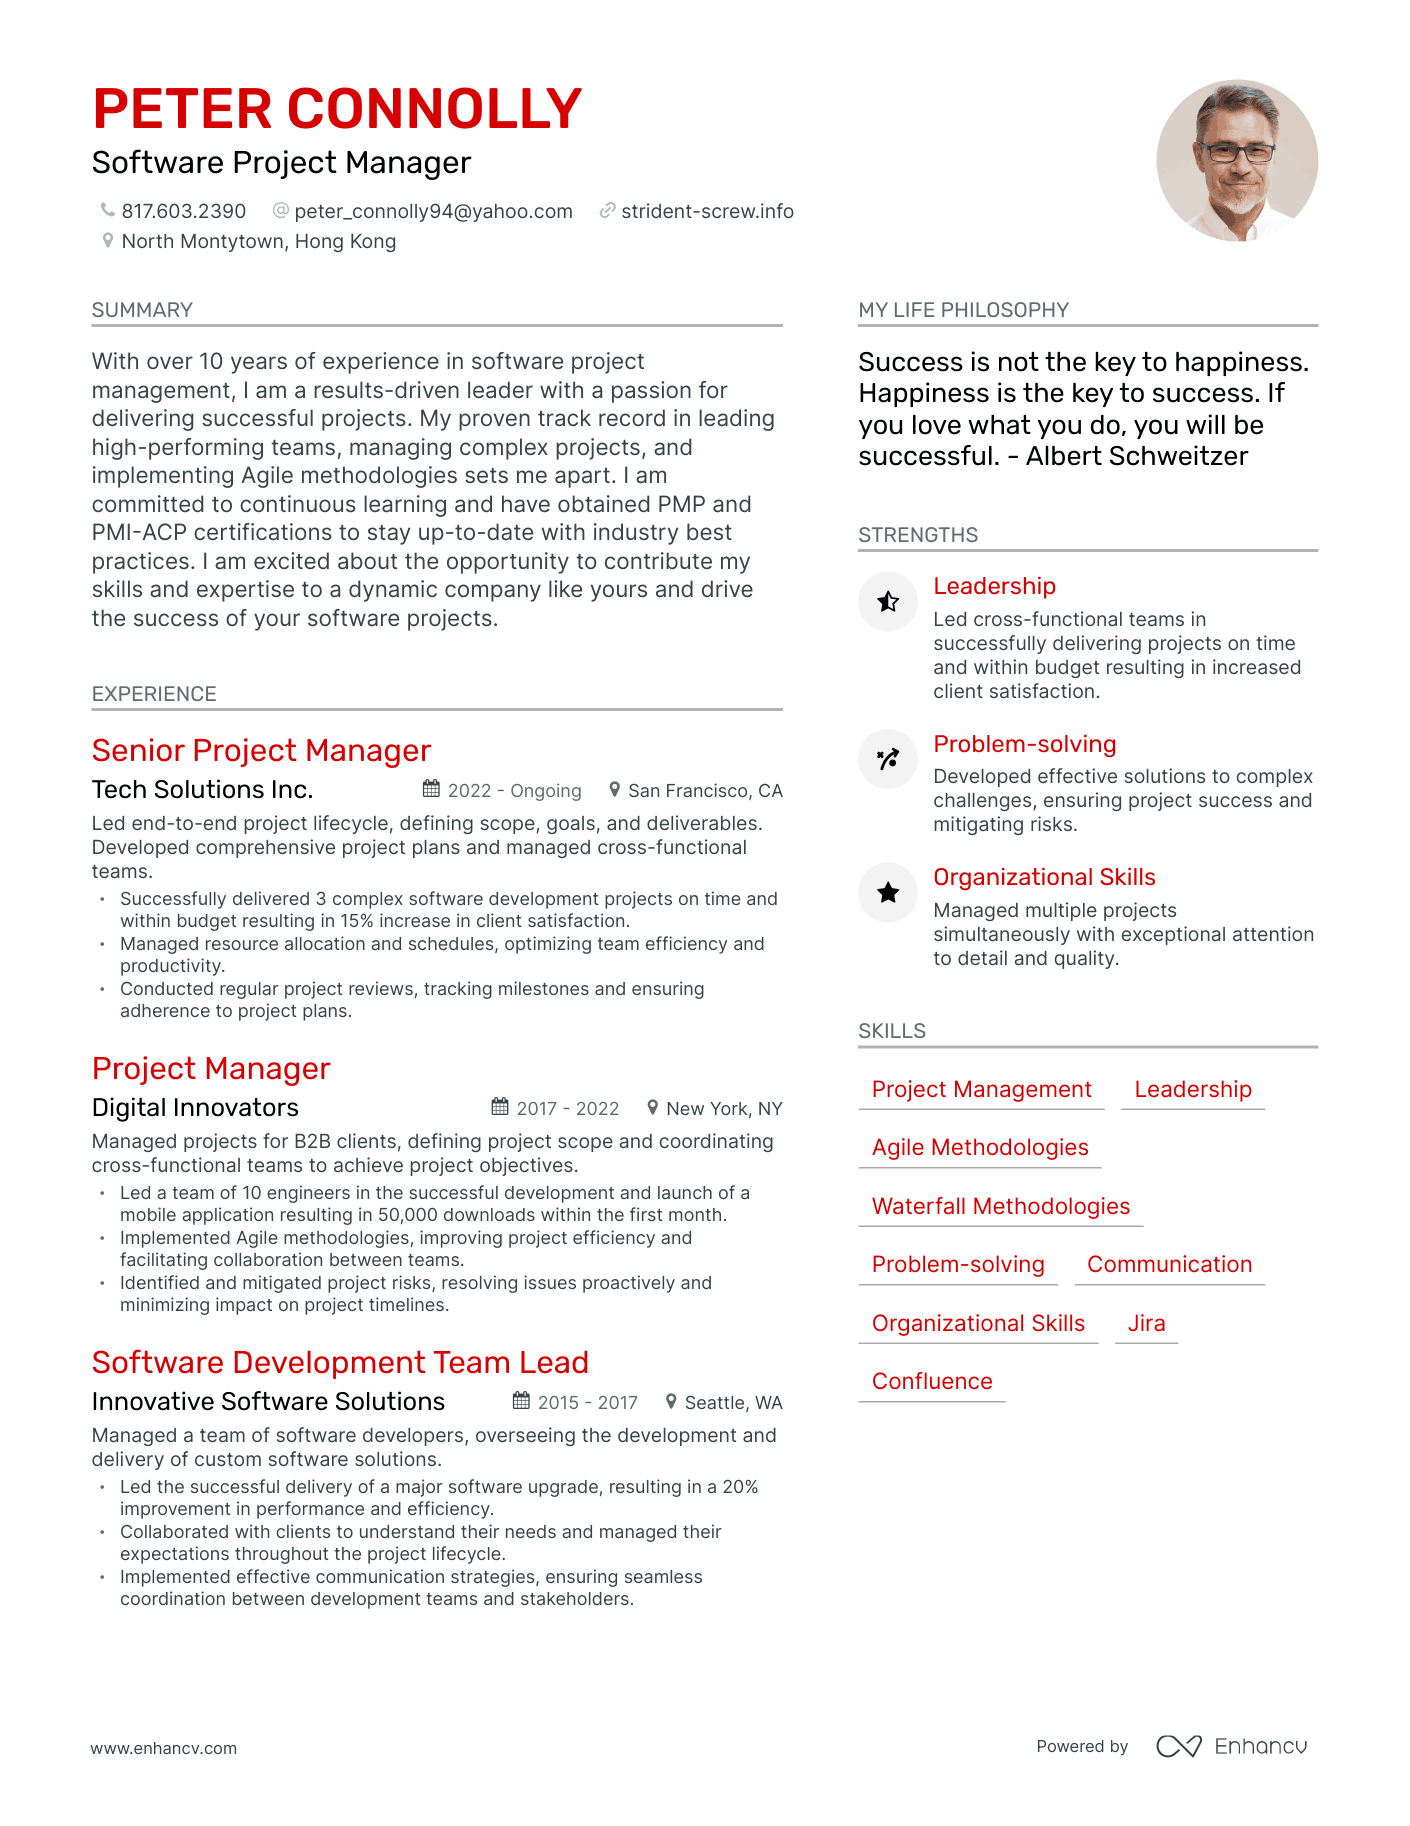 Software Project Manager resume example